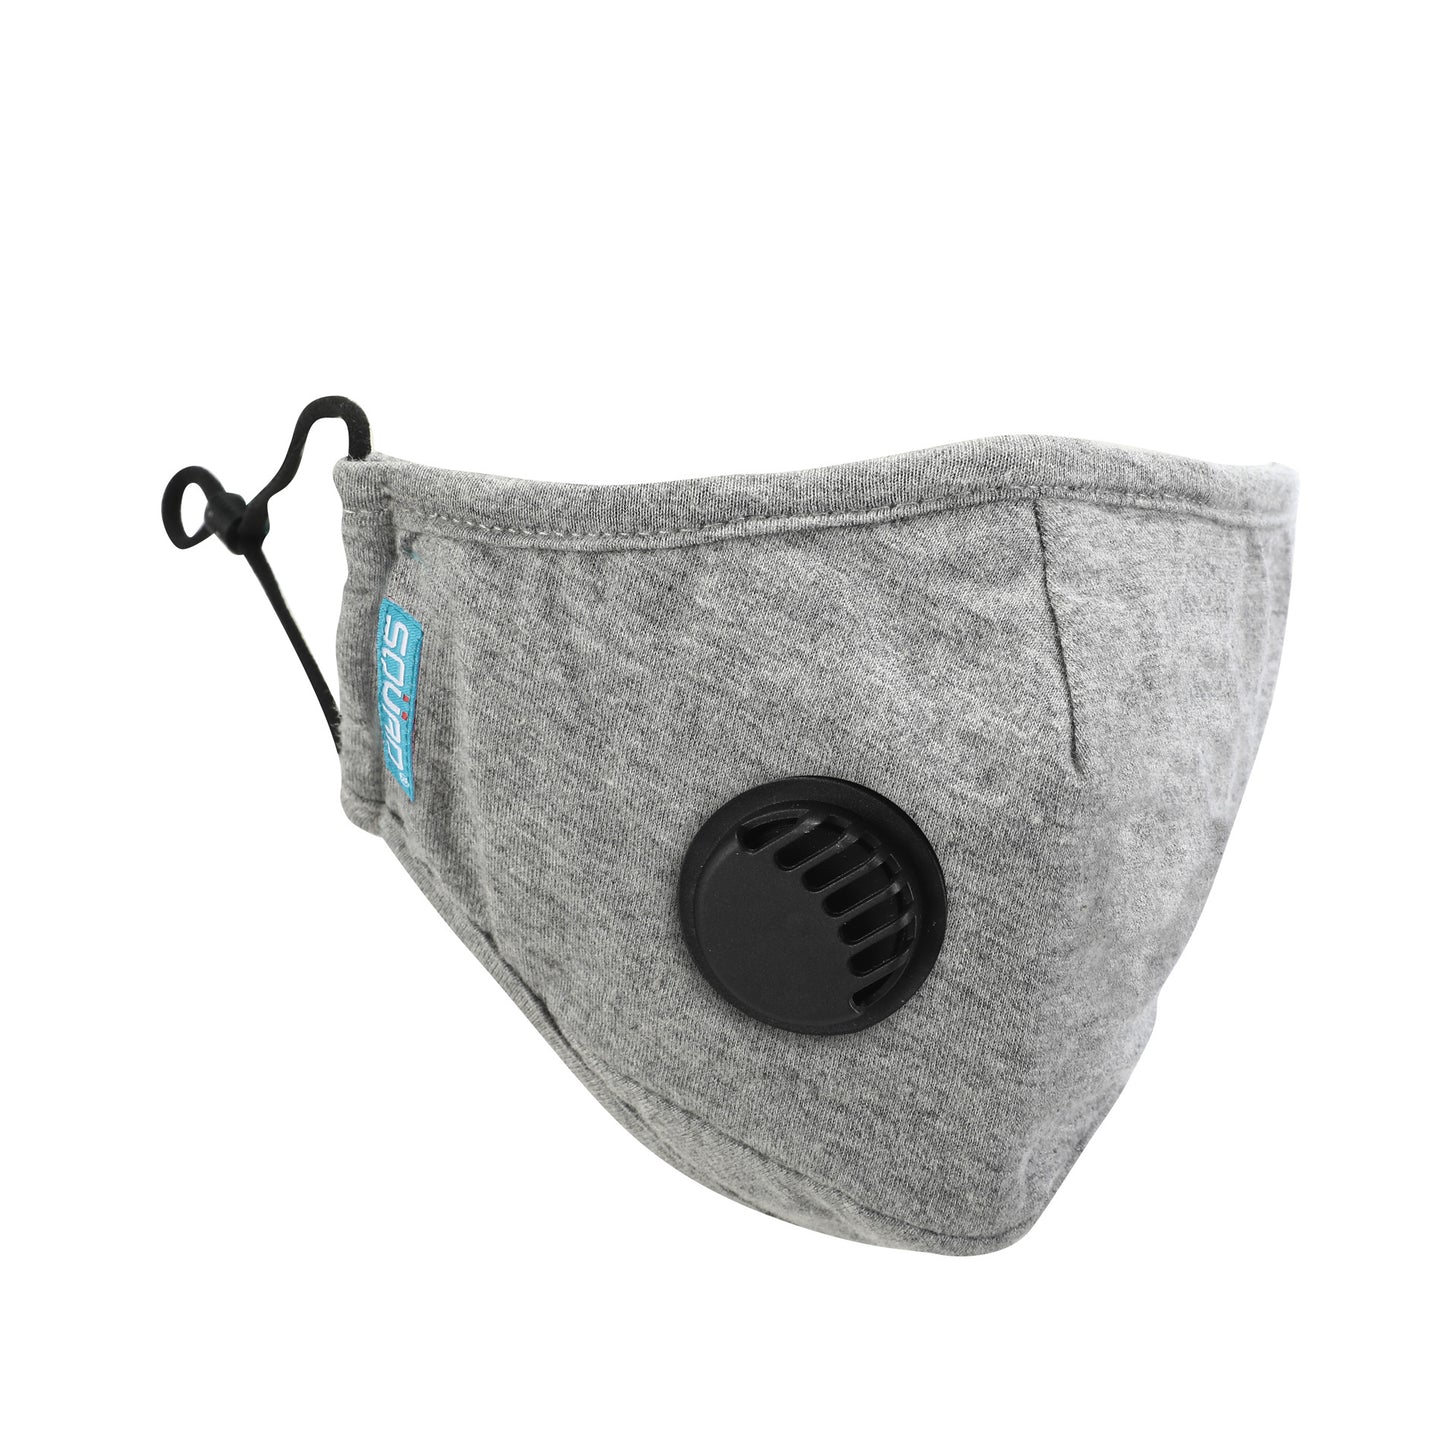 Reusable and Washable Masks. Comes with a Neoprene pouch, carabiner and lanyard for easy storage and mobility